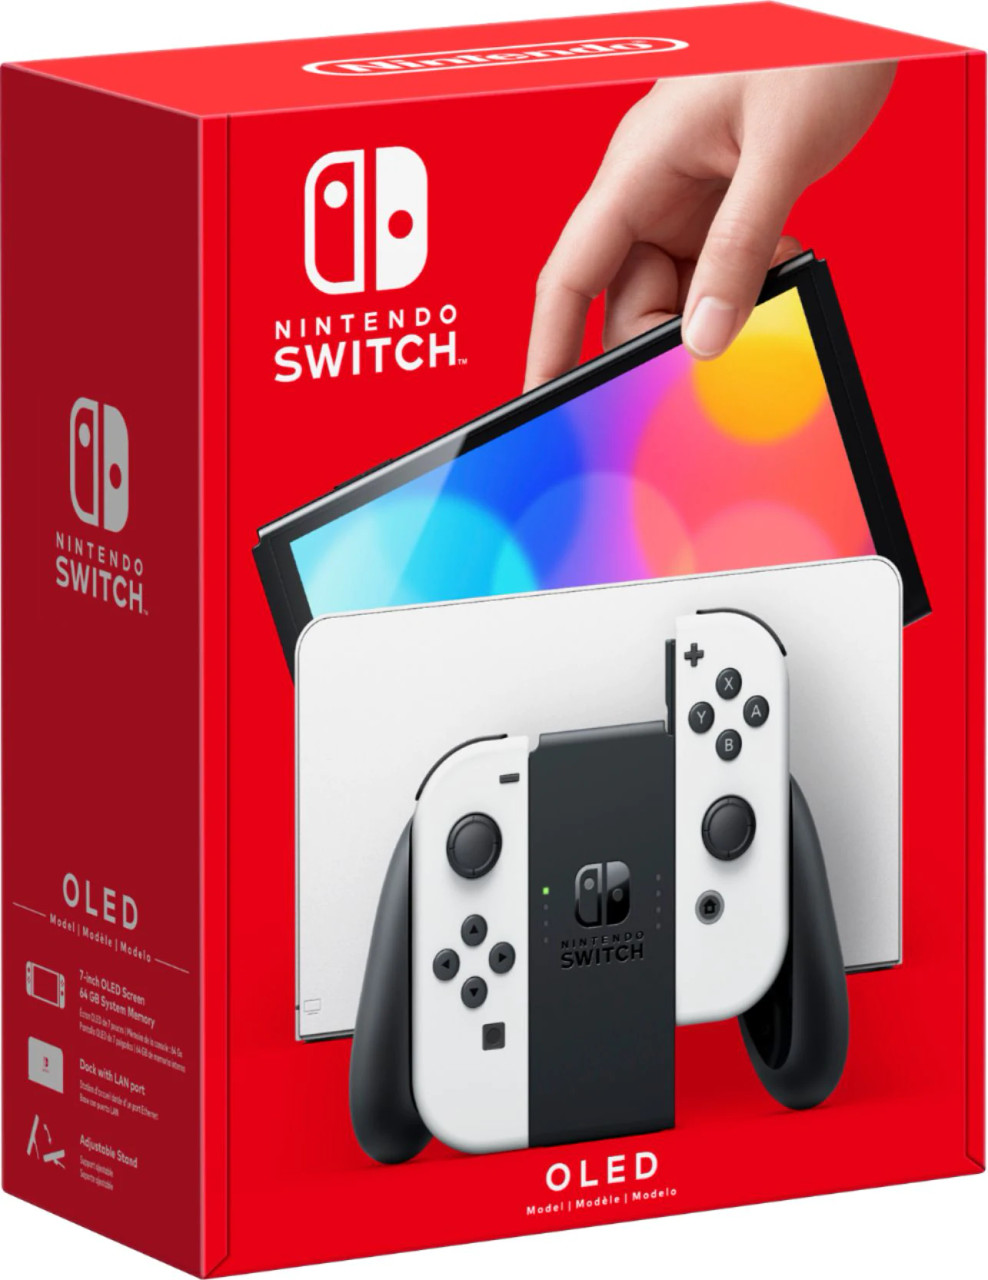 Nintendo Switch Mojo Buy | OLED Computers Best | Model At Online Price